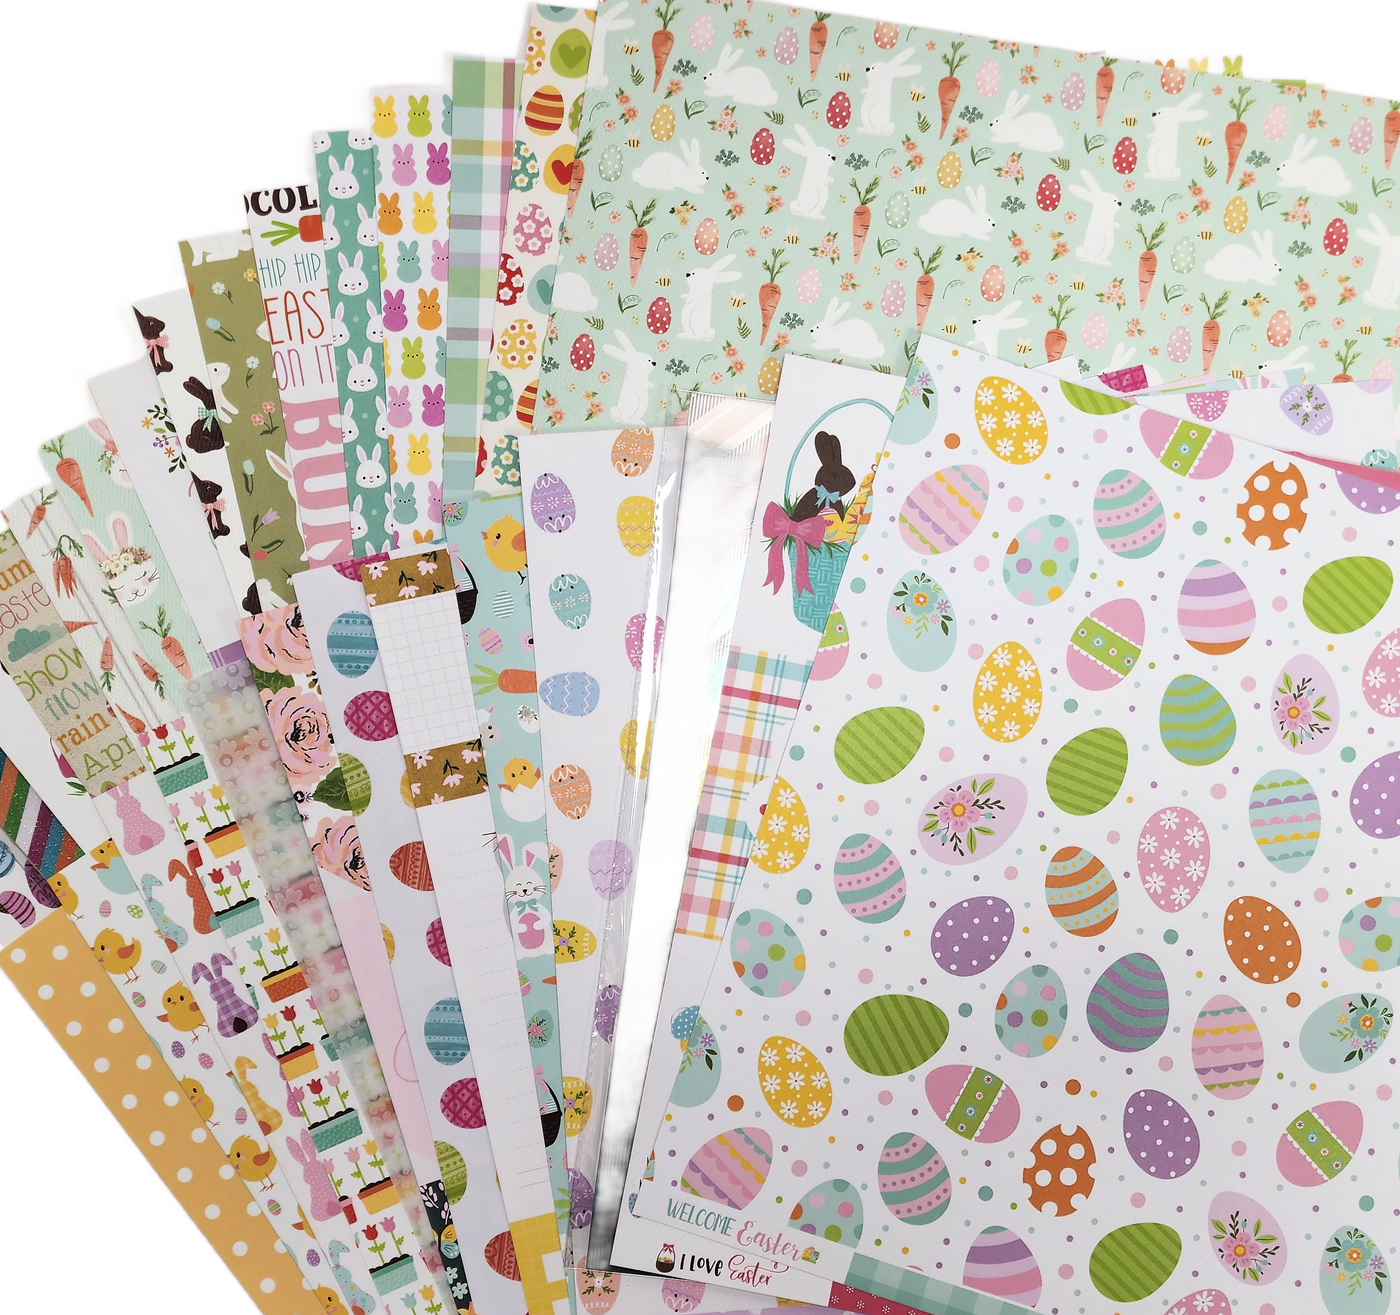 30 pieces of cardstock and specialty papers in Easter prints and colors. Mixed textures and finished Brands include American Crafts, Echo Park, Pebbles, and Recollections.